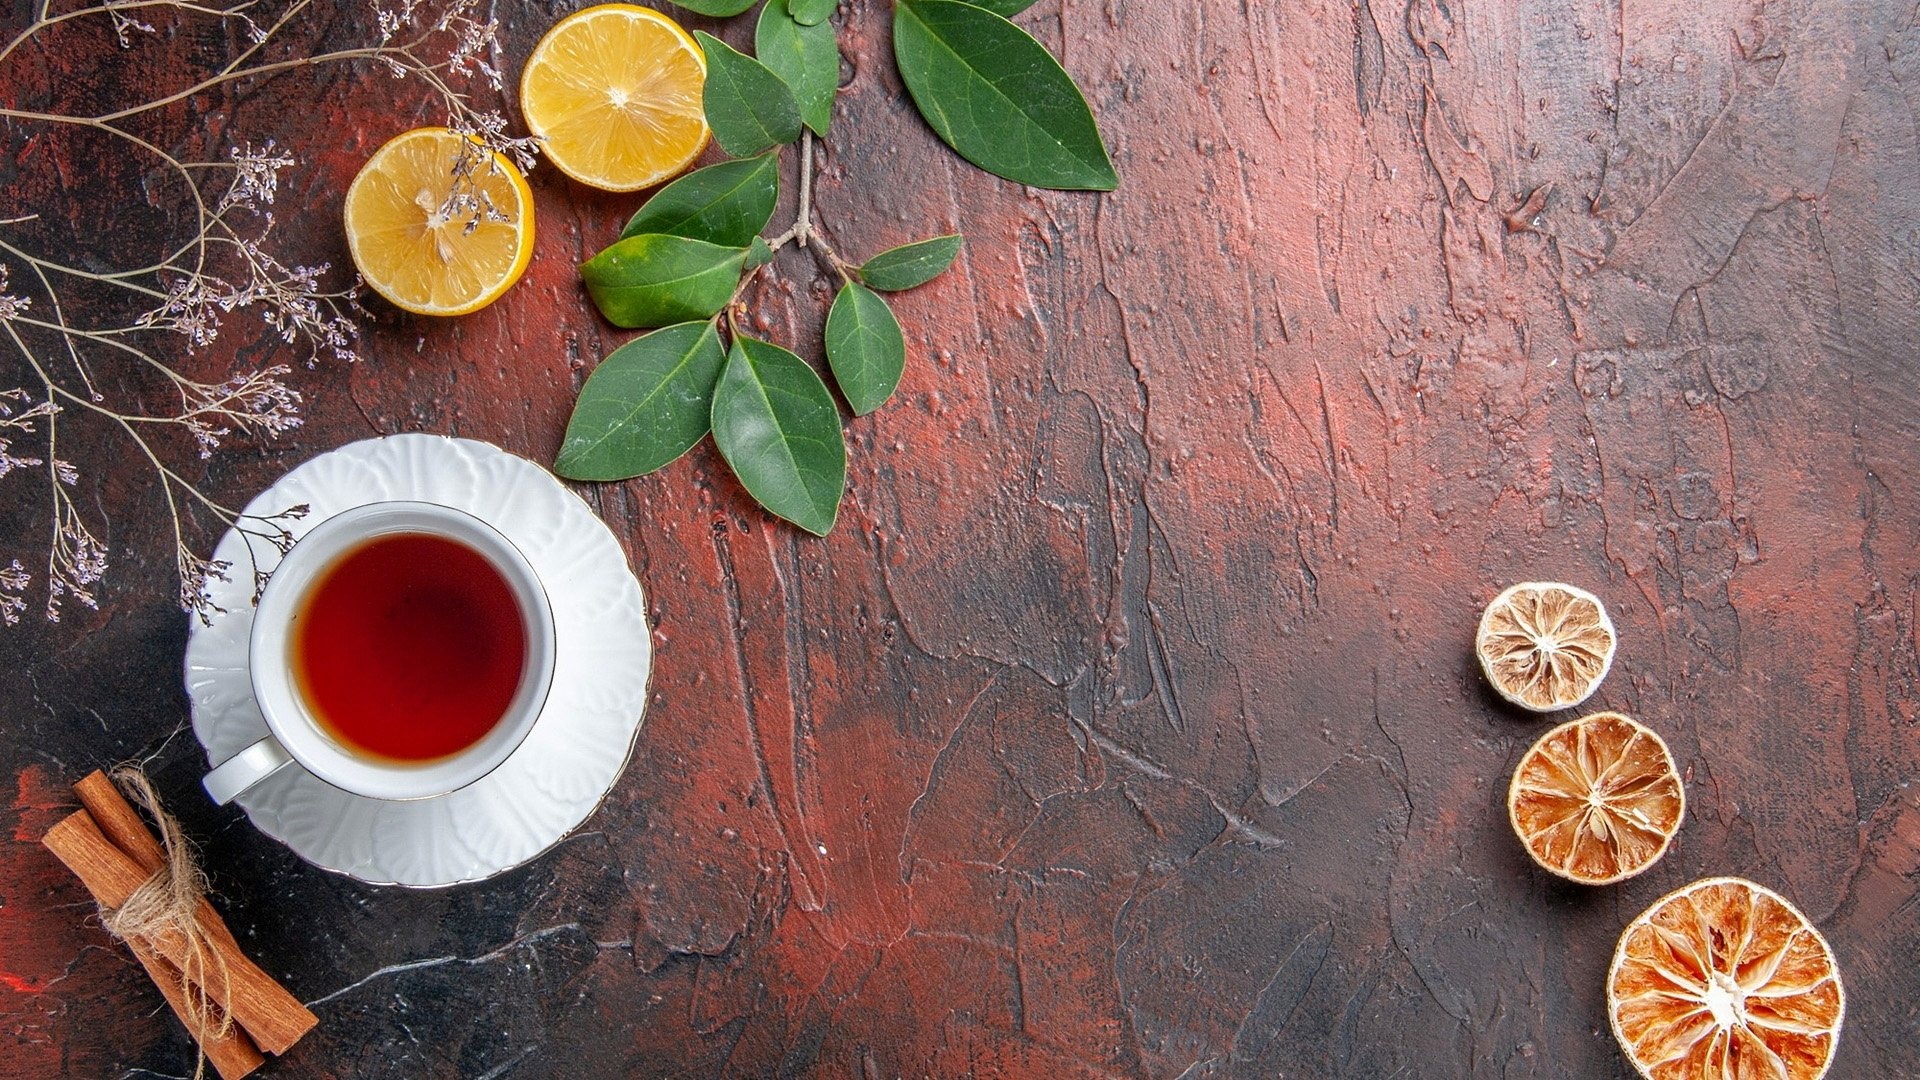 Tea: Pu-erh, comes from Yunnan, a Chinese province. 1920x1080 Full HD Background.